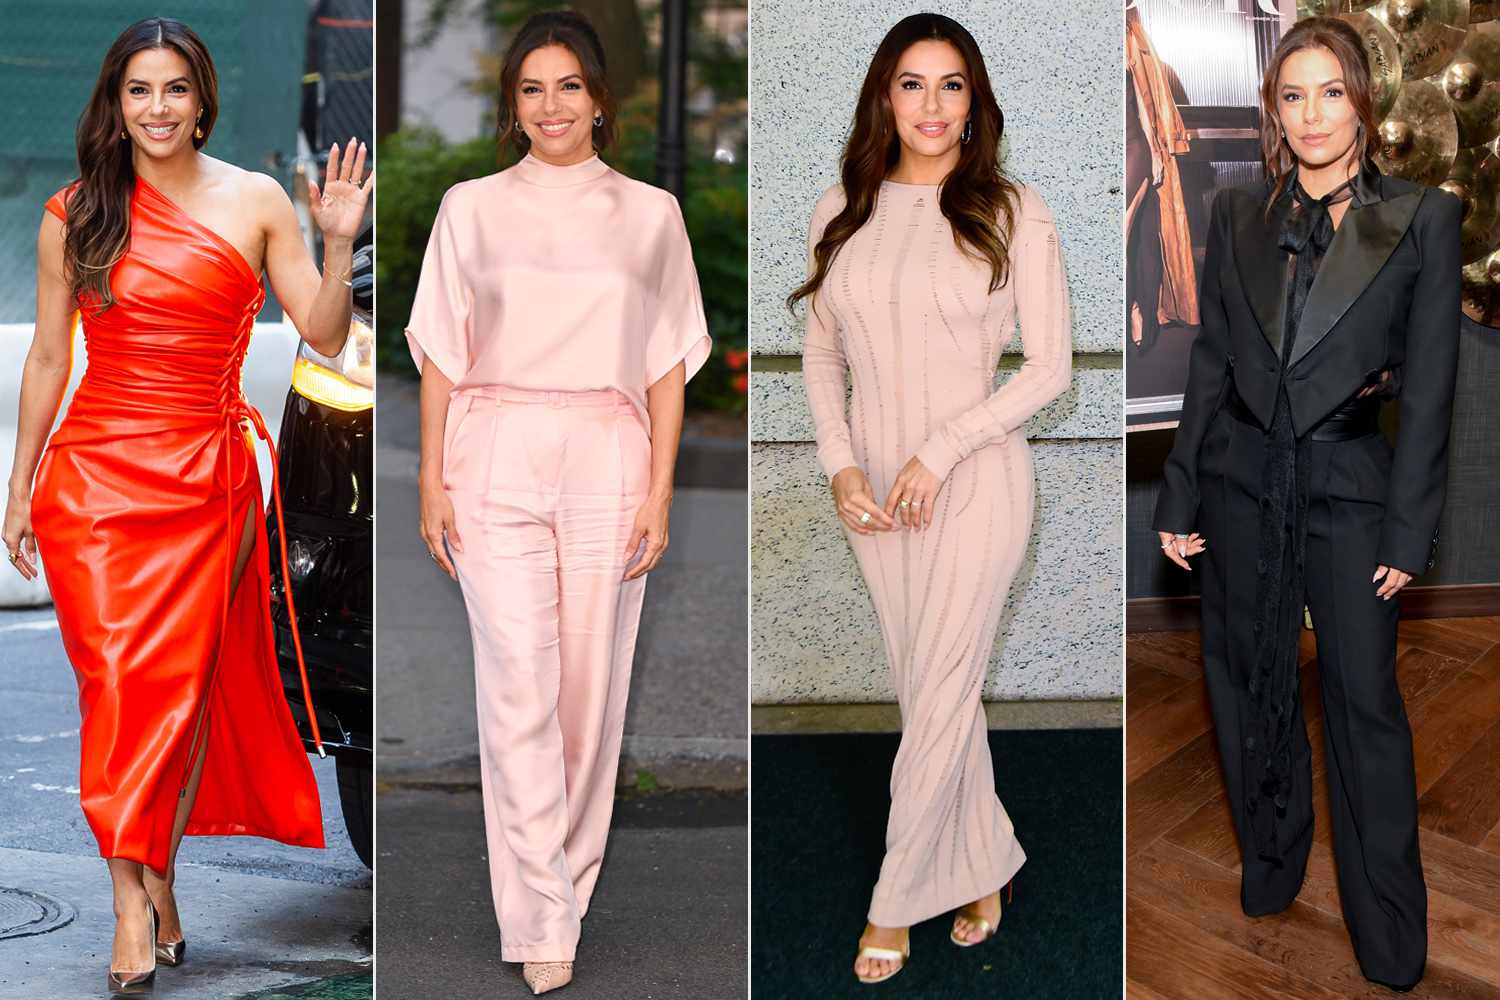 Eva Longoria Masters the Quick Change with 8 Different Outfits (and Stilettos!) in the Same Day